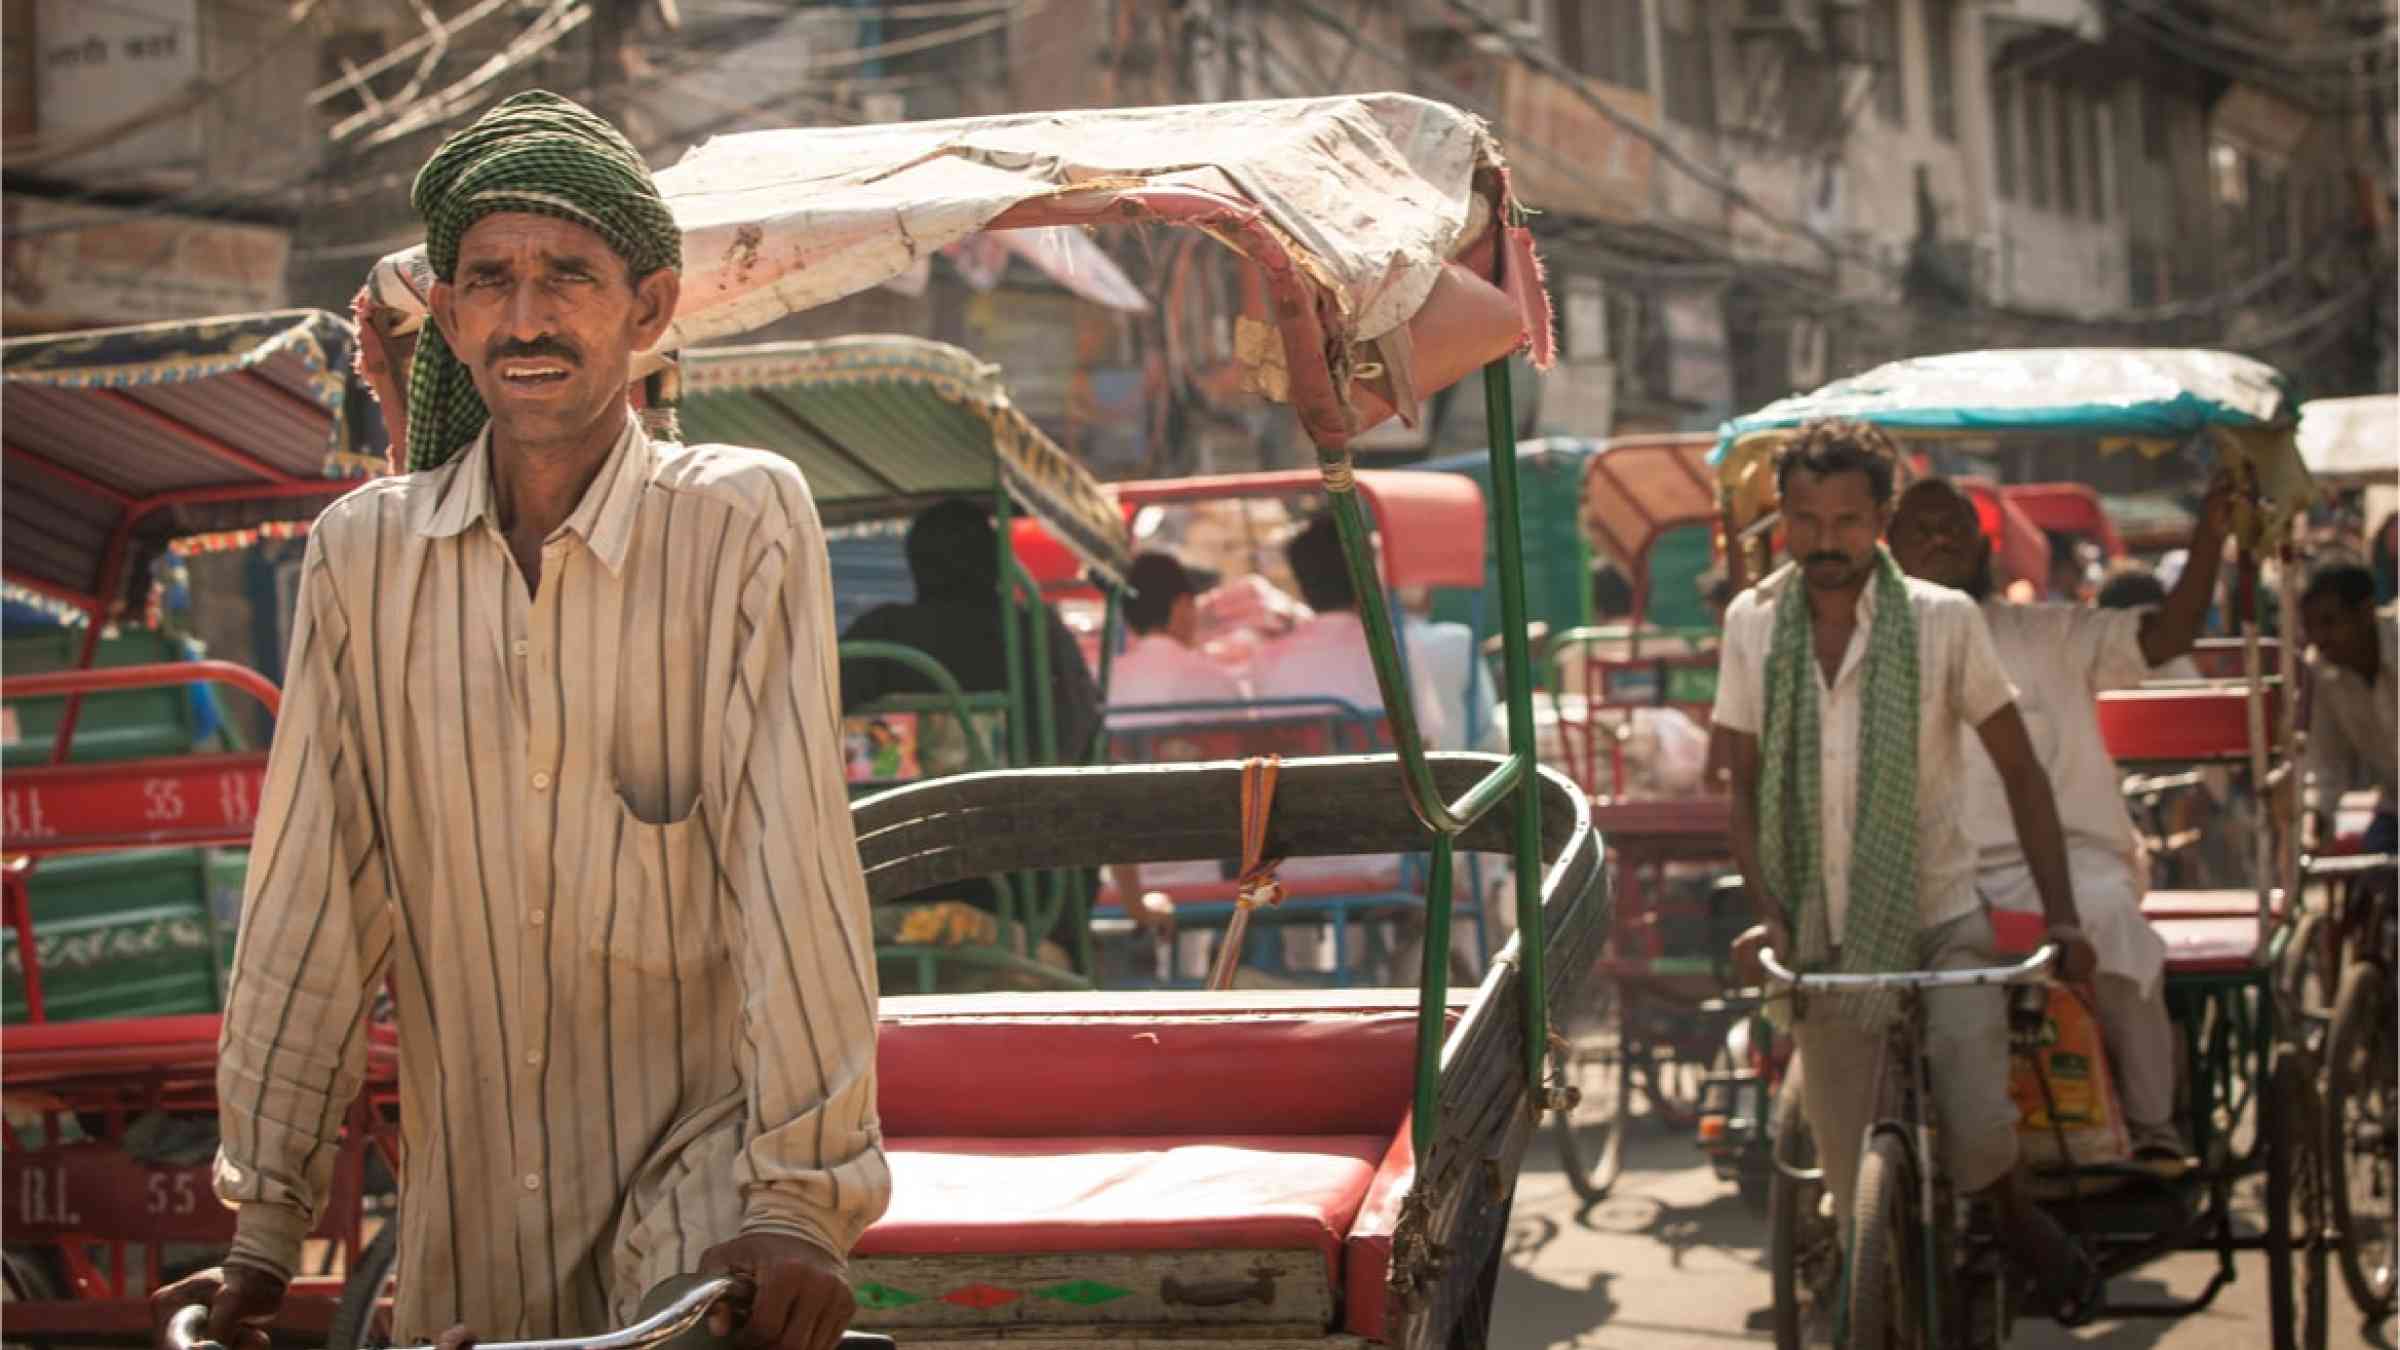 Two Rickshaw pullers in India on the hot streets.